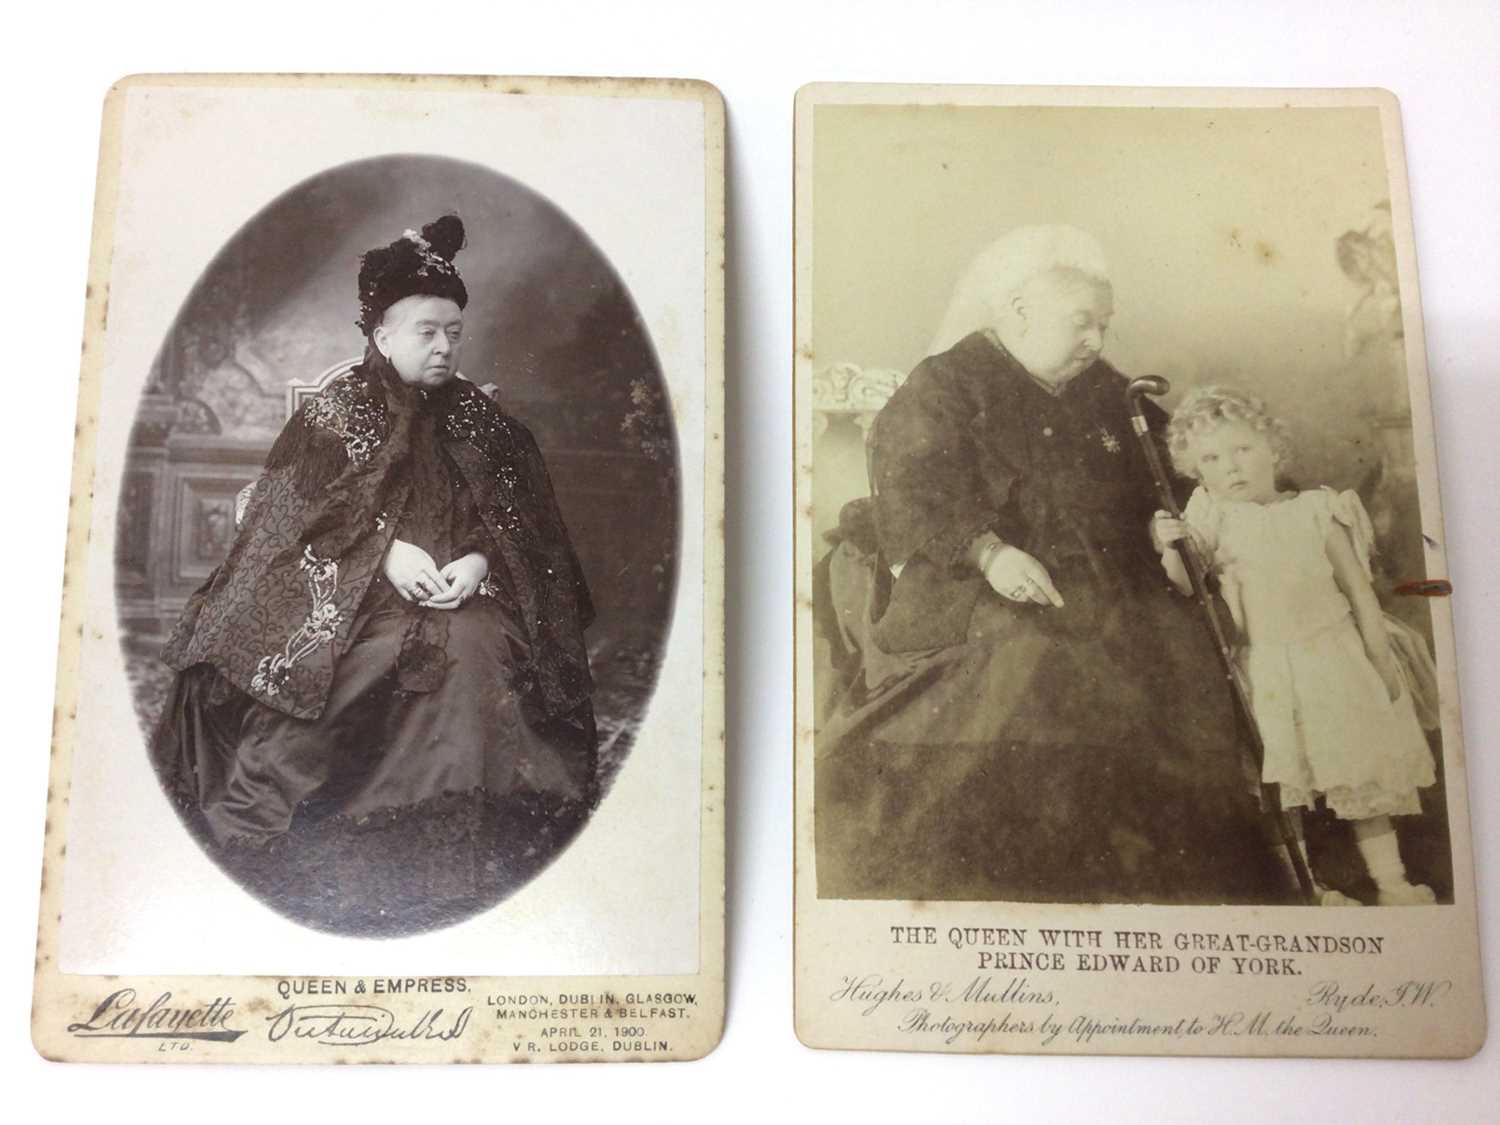 Lot 87 - H.M.Queen Victoria, fine cabinet photograph by Lafayette and another of The Queen with her Great Grandson Prince Edward of York ( later King Edward VIII ) both 16.2 x 10.6 cm (2)